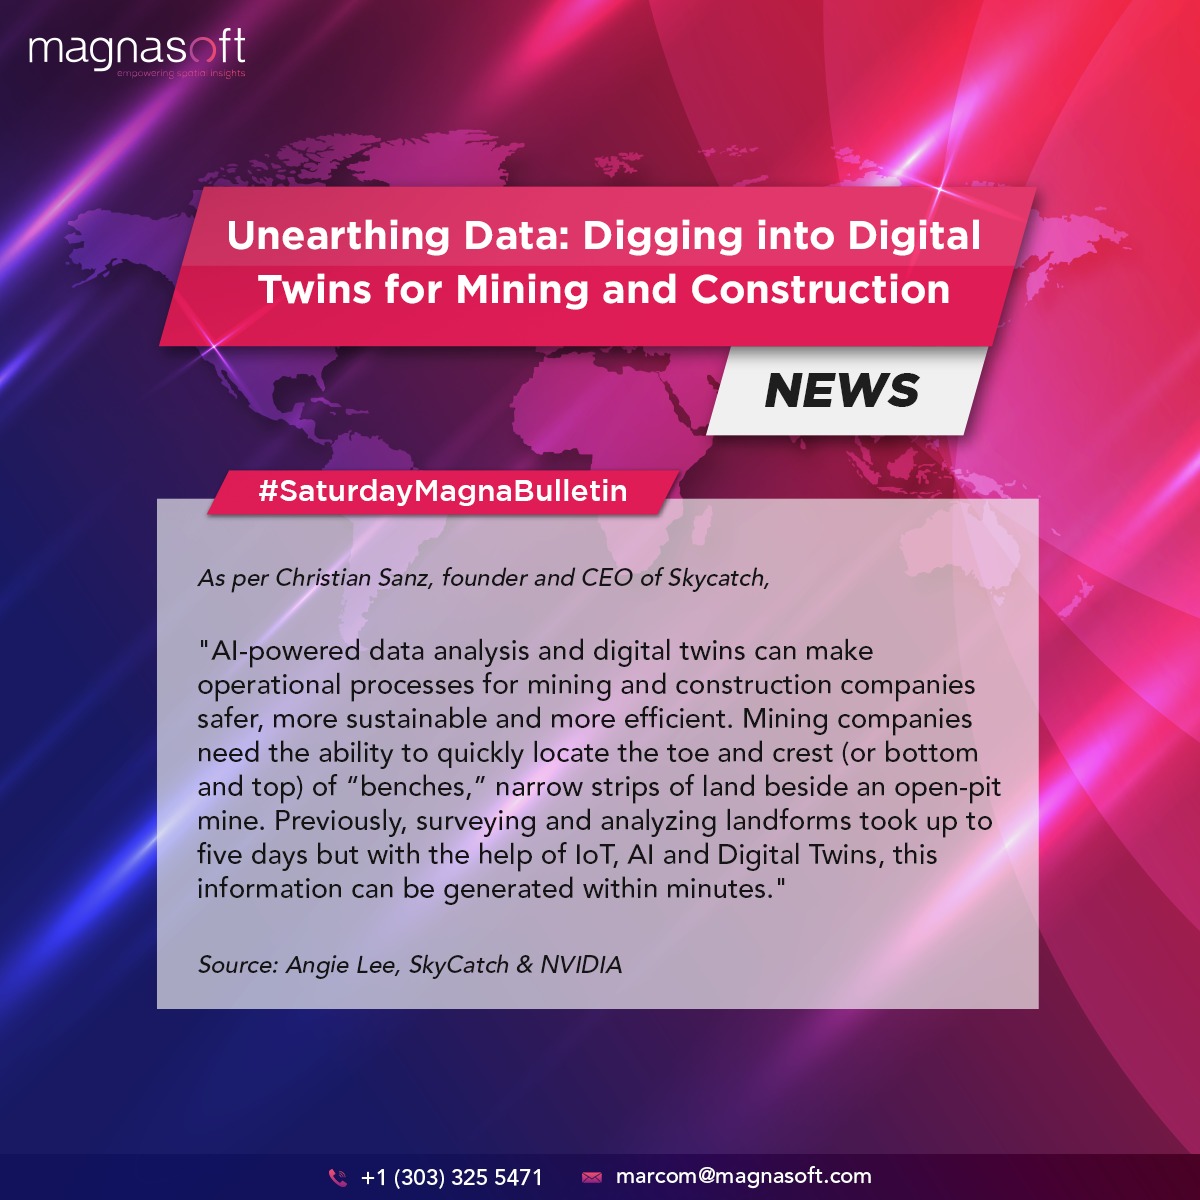 As per statistics, the amount of companies that mentioned ‘digital twin’ technology increased by 43% in 2022 when compared to 2020. . #diginews #digitalnews #technews #magnanews #geospatial #geotech #digitaltechnology #smarttech #climatechange #digitalization #industry